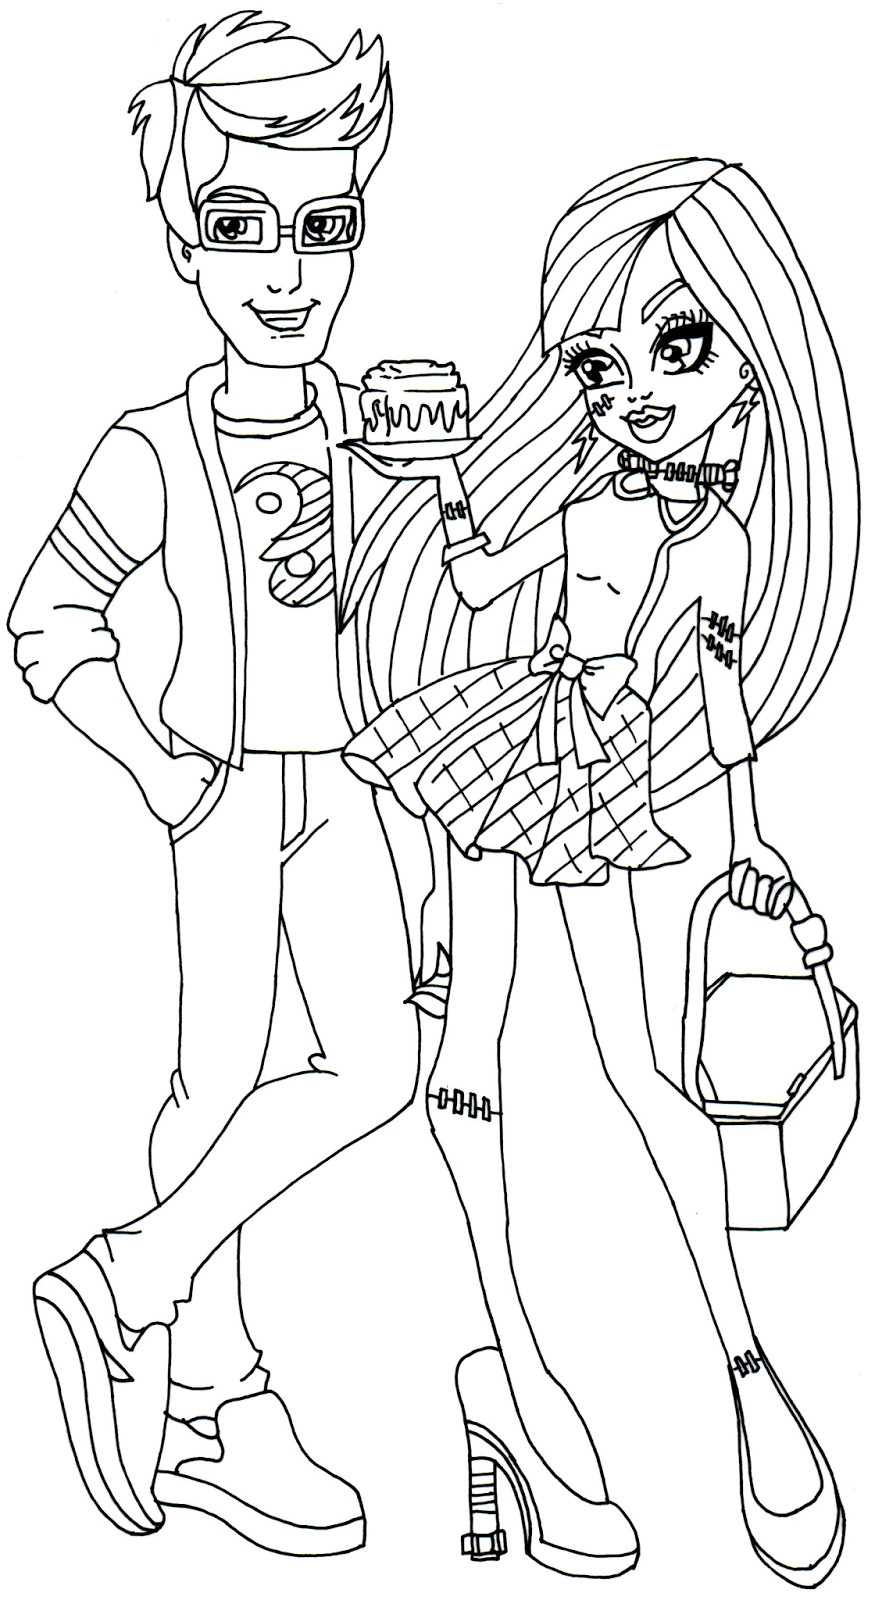 Cool Coloring Pages For Girls
 Coloring Pages Girl Coloring Pages Coloring Pages For